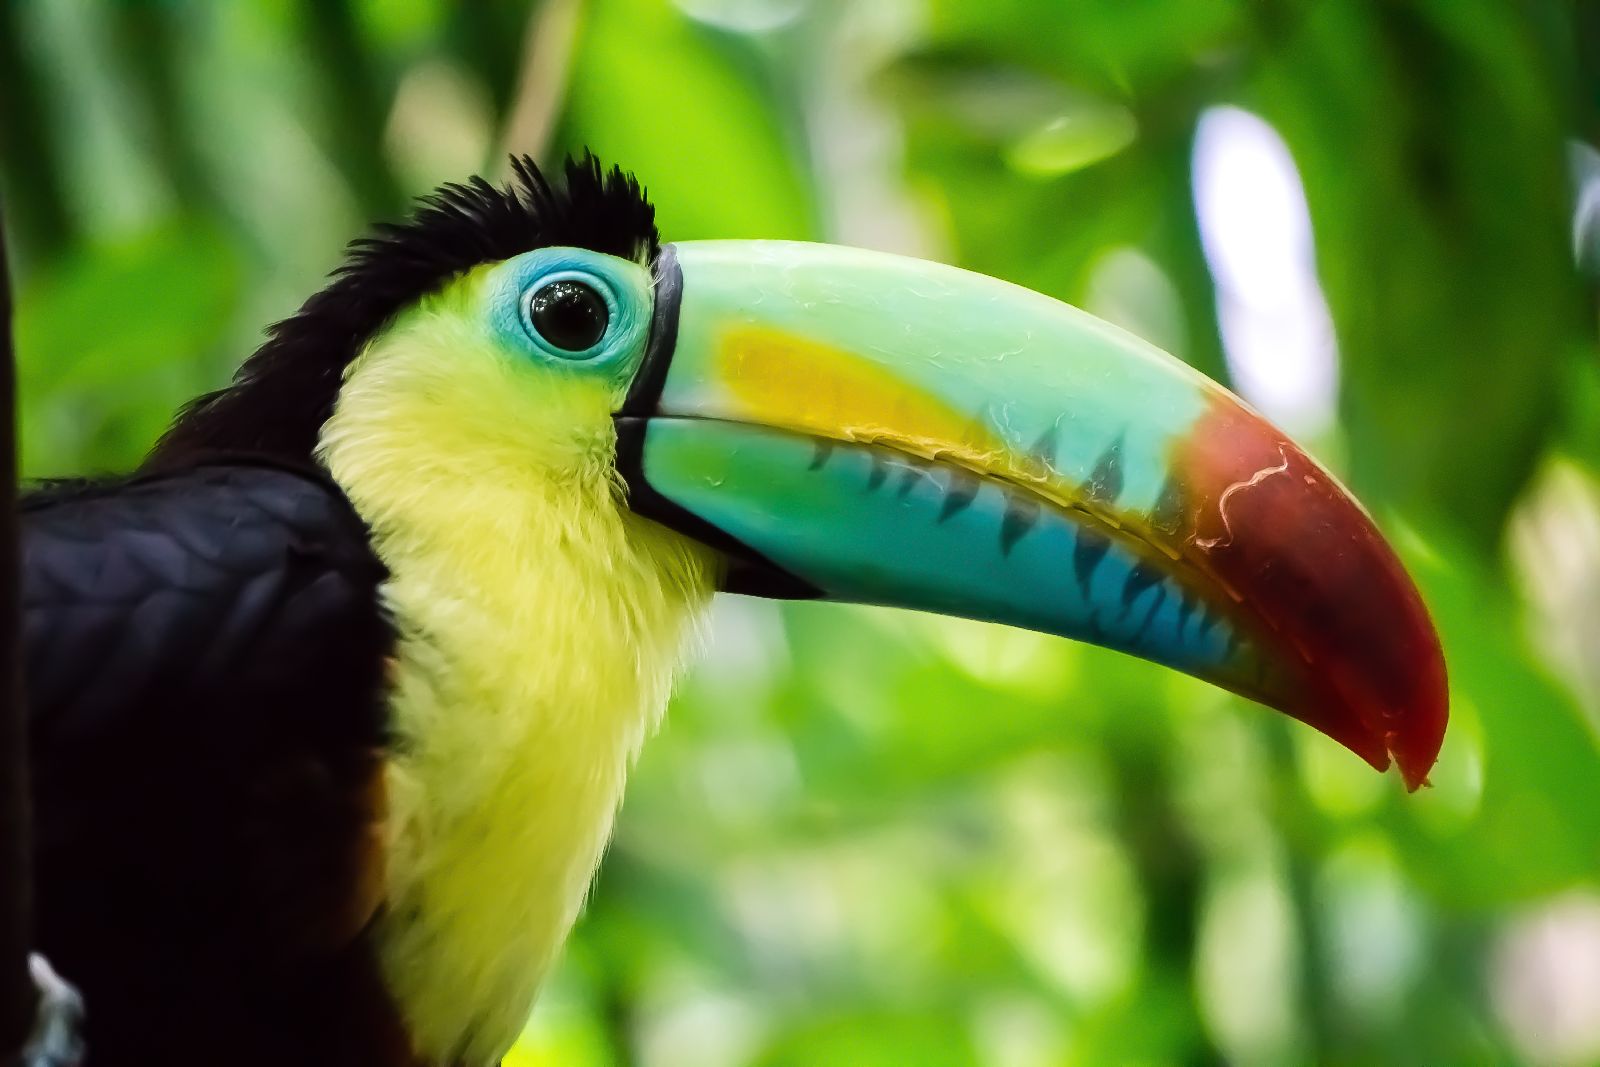 A toucan in the tropical forests of Central America